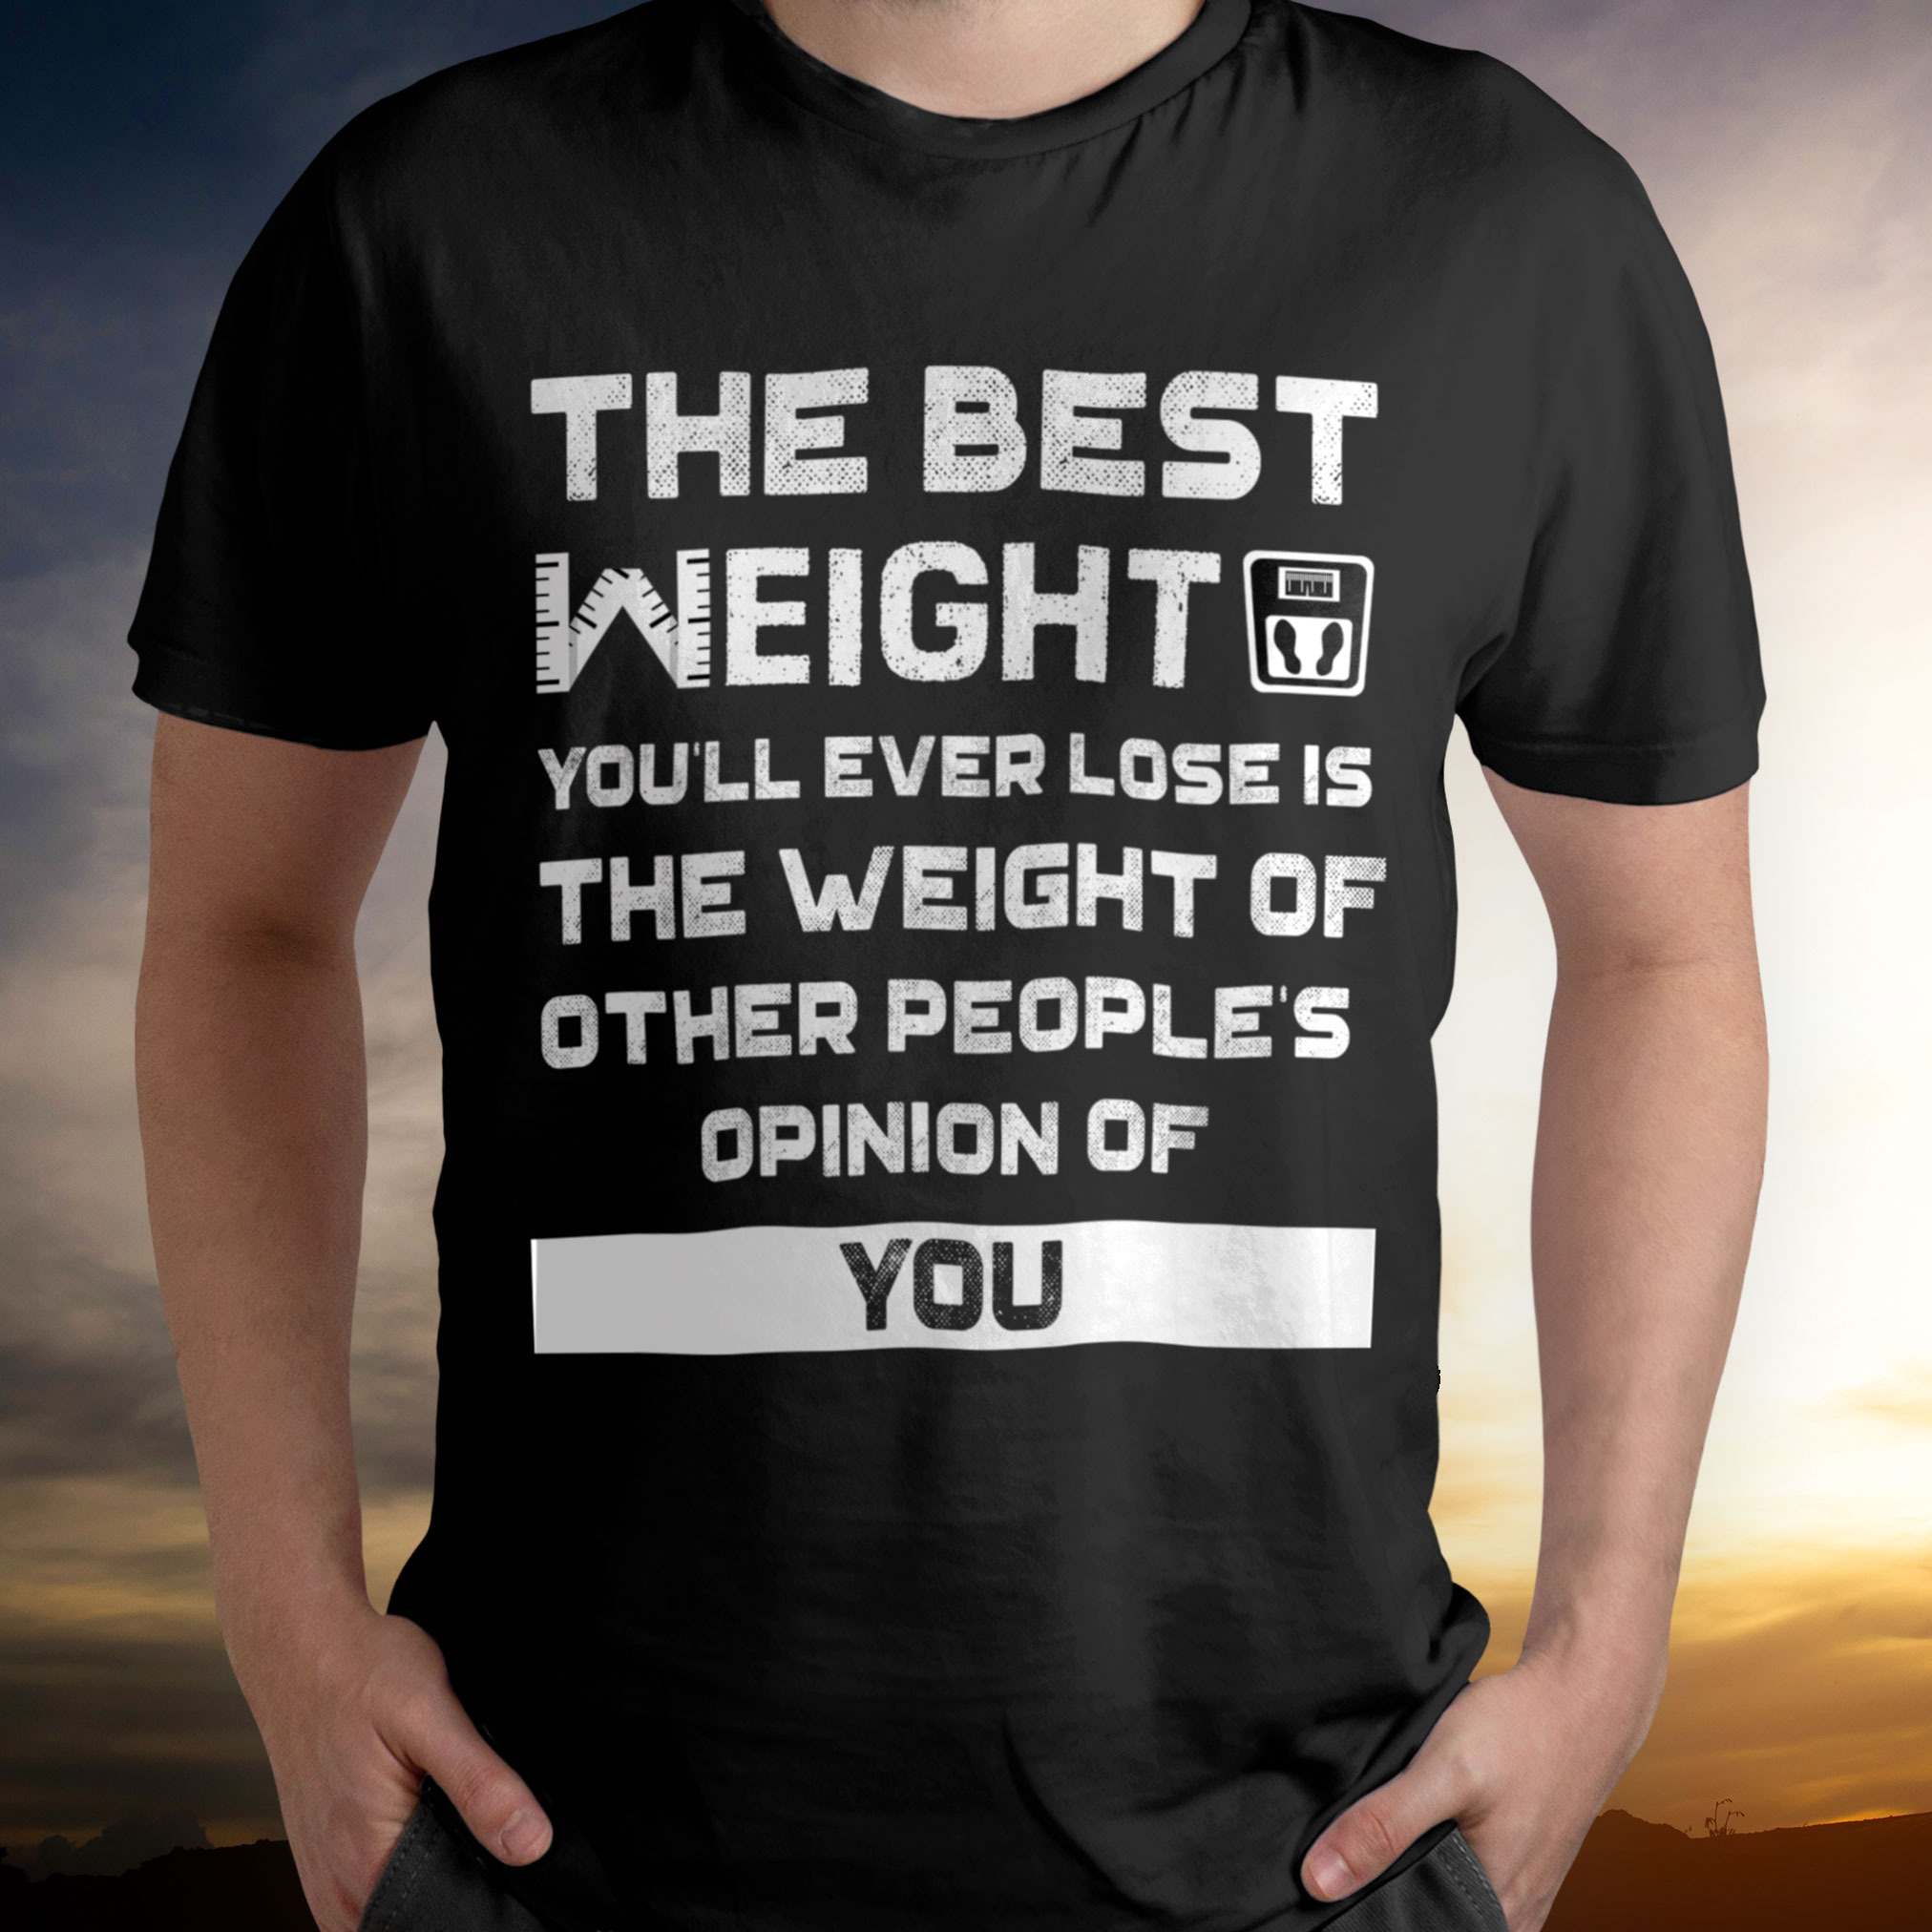 The best weight you'll ever lose is the weight of other people's ...